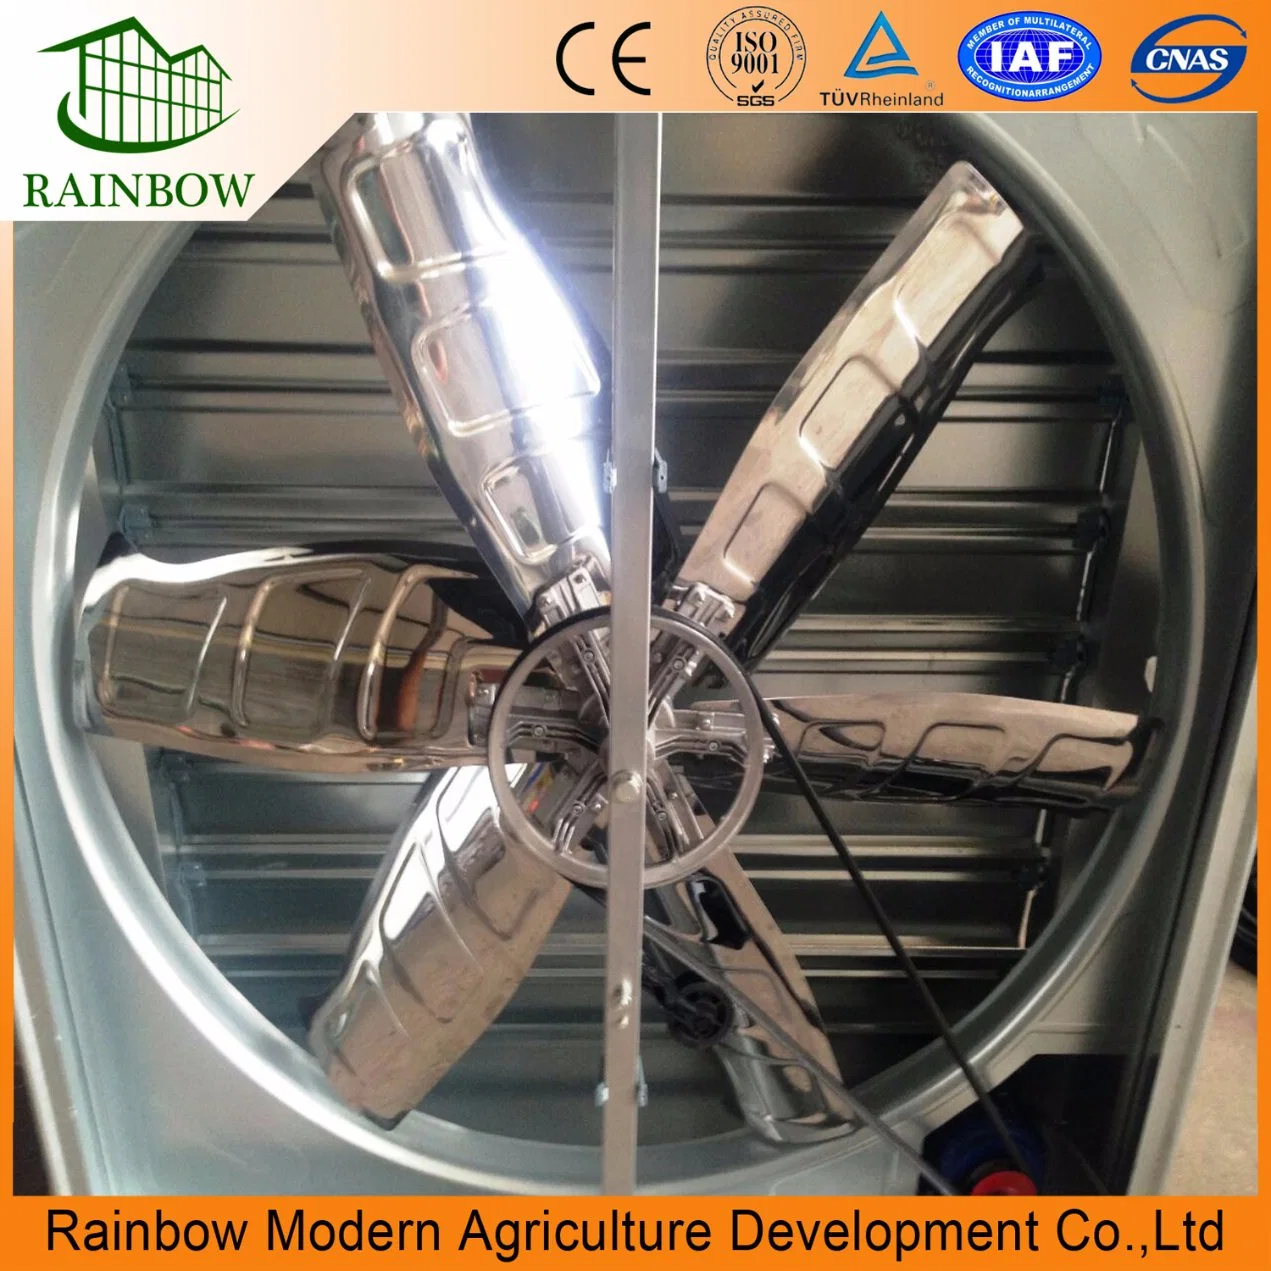 Ventilation Exhaust Cooling Fan for Greenhouse or Poultry Farms